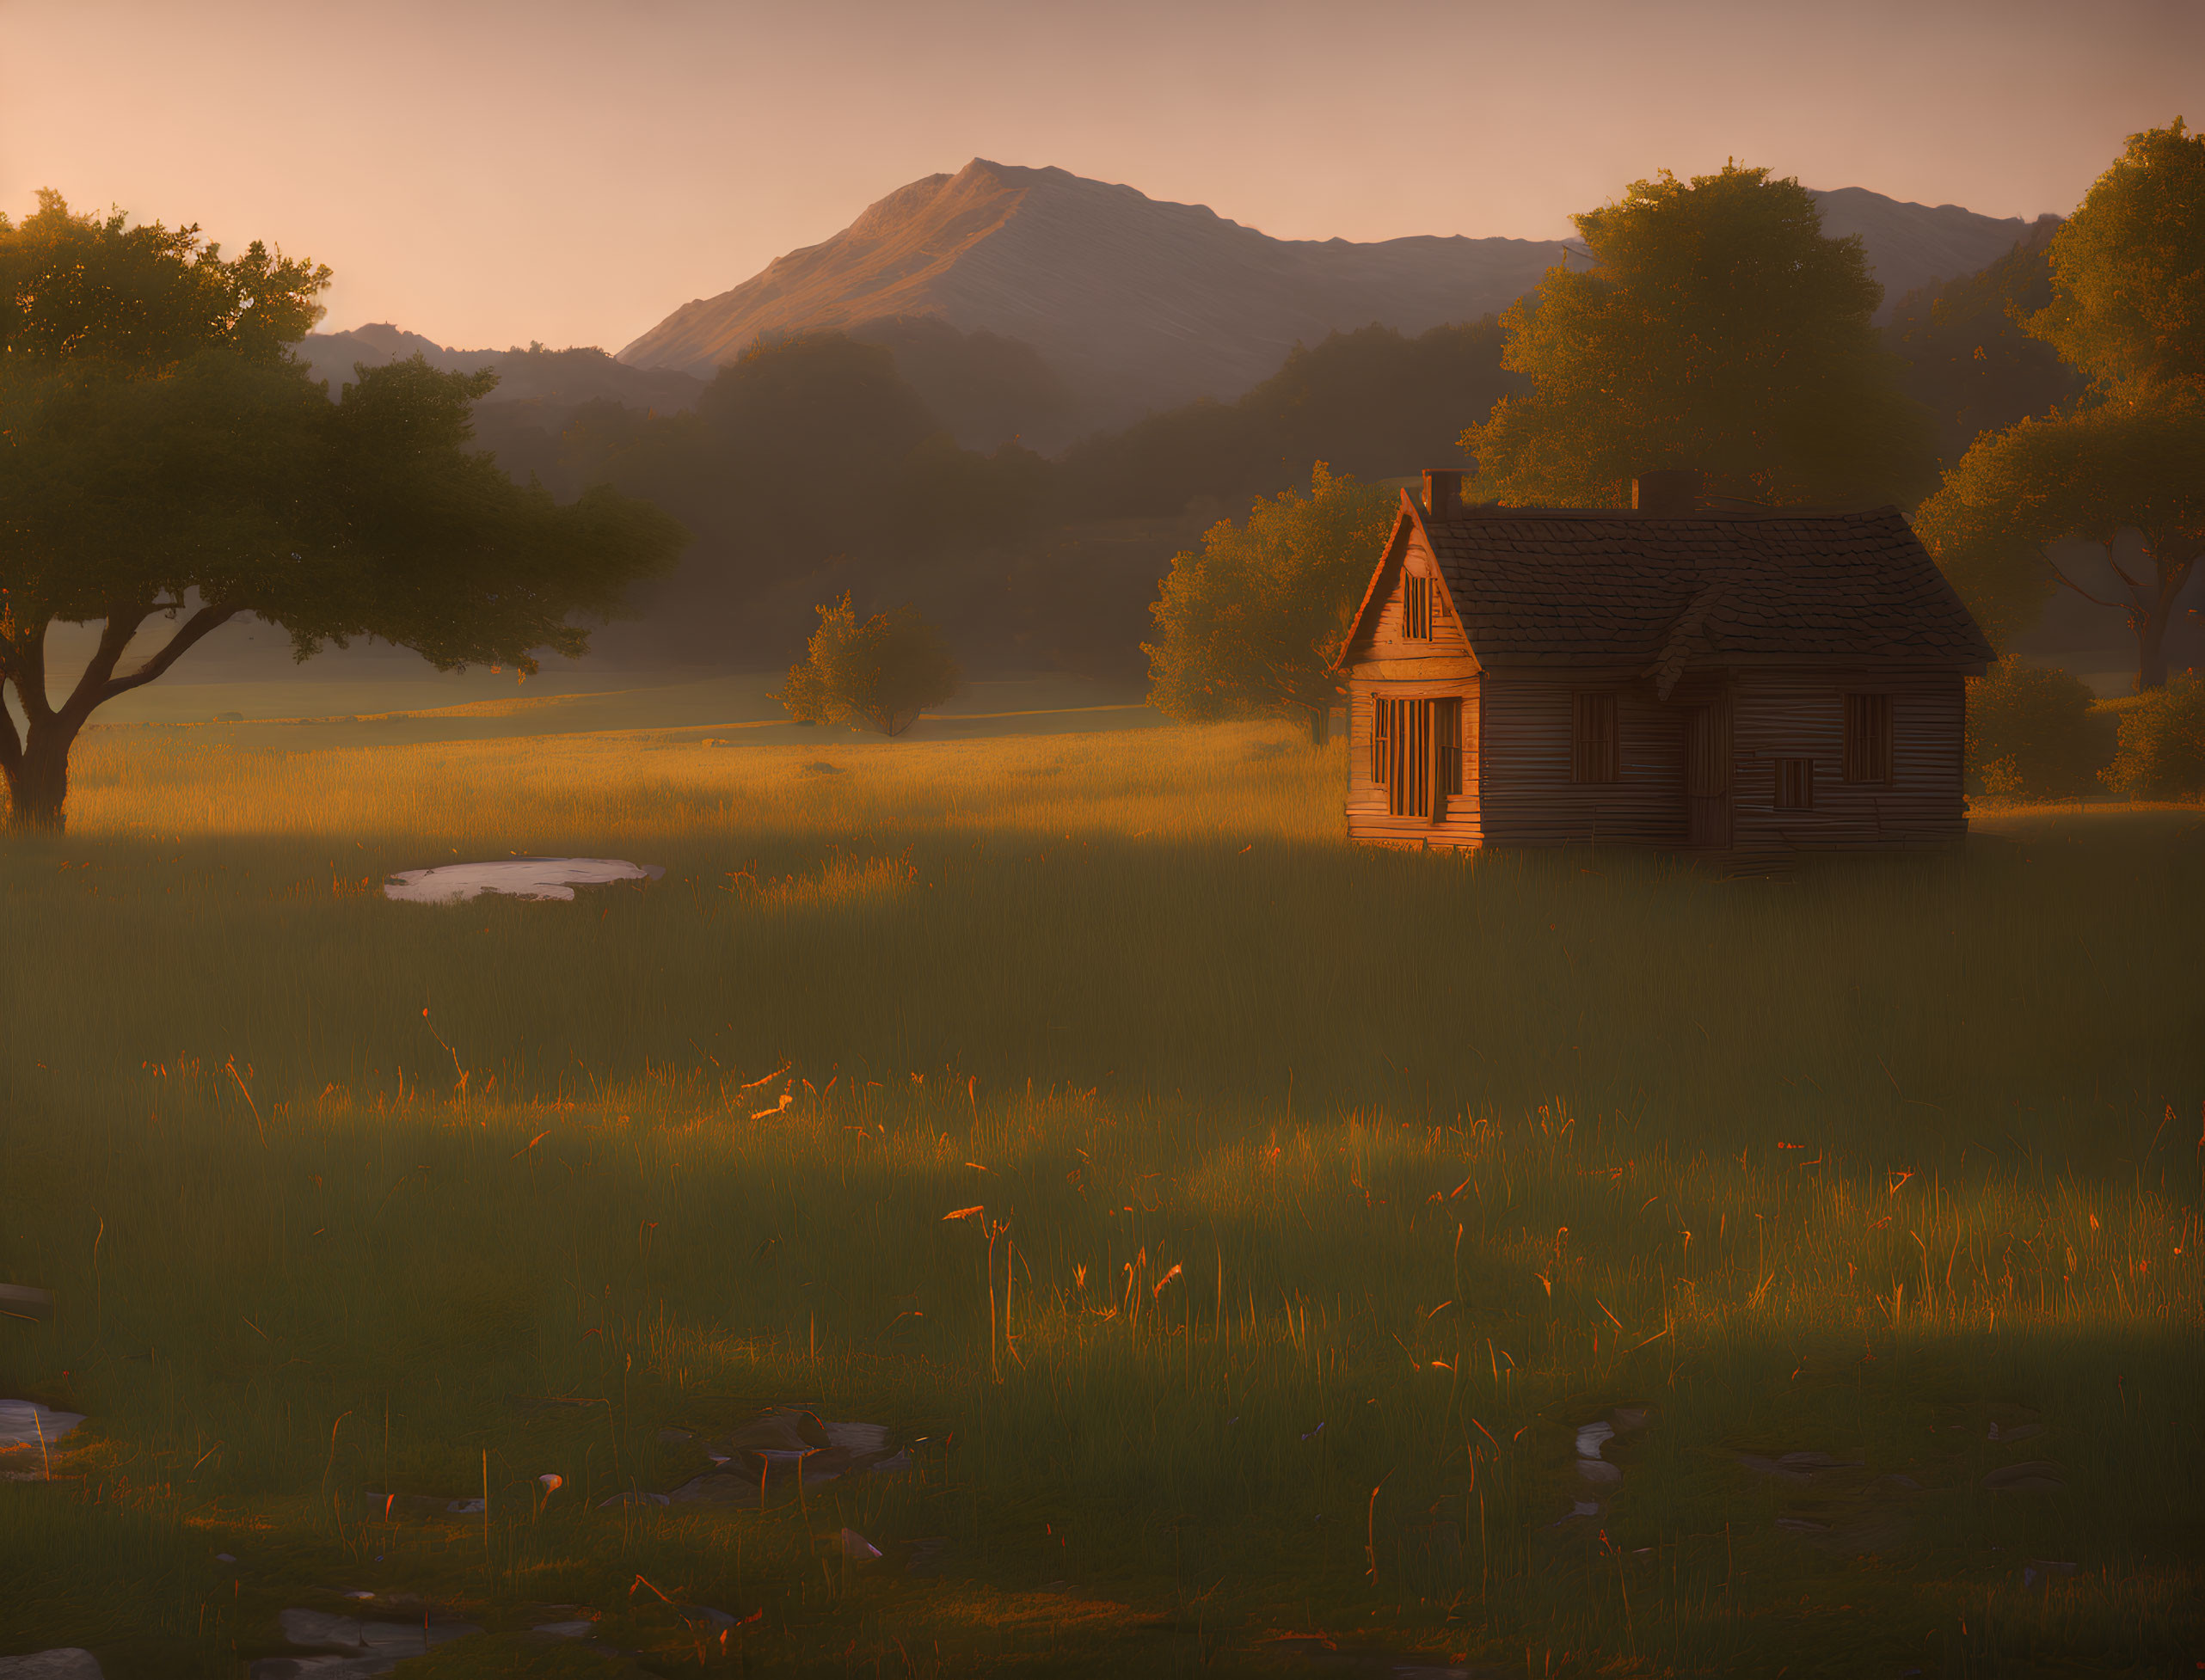 Tranquil sunrise landscape with wooden cabin, field, trees, and mountain in warm light